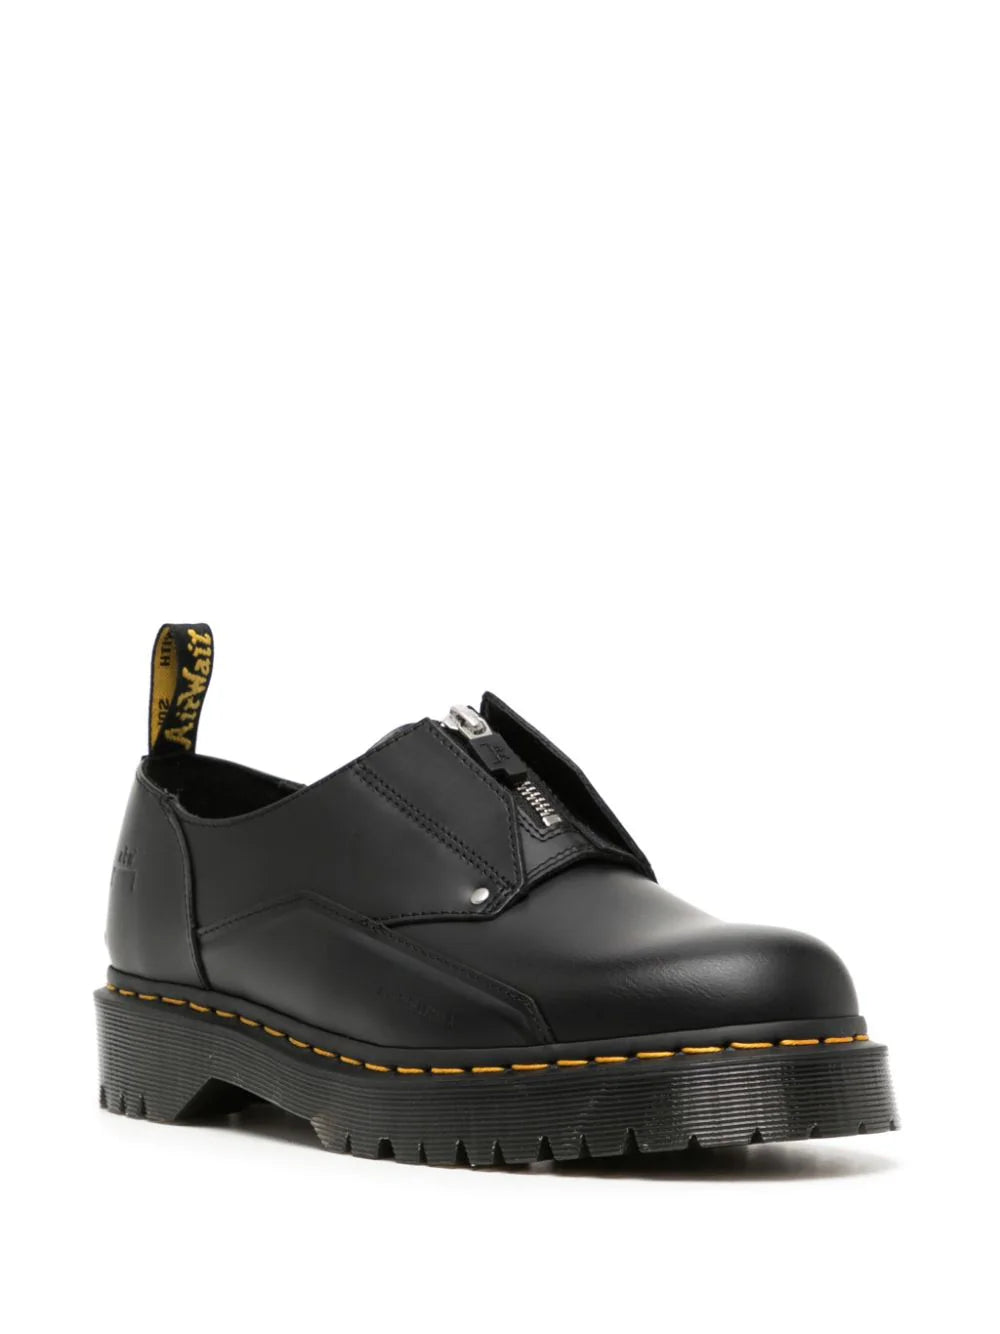 DR. MARTENS 1461 BEX A-COLD-WALL - BLACK SMOOTH